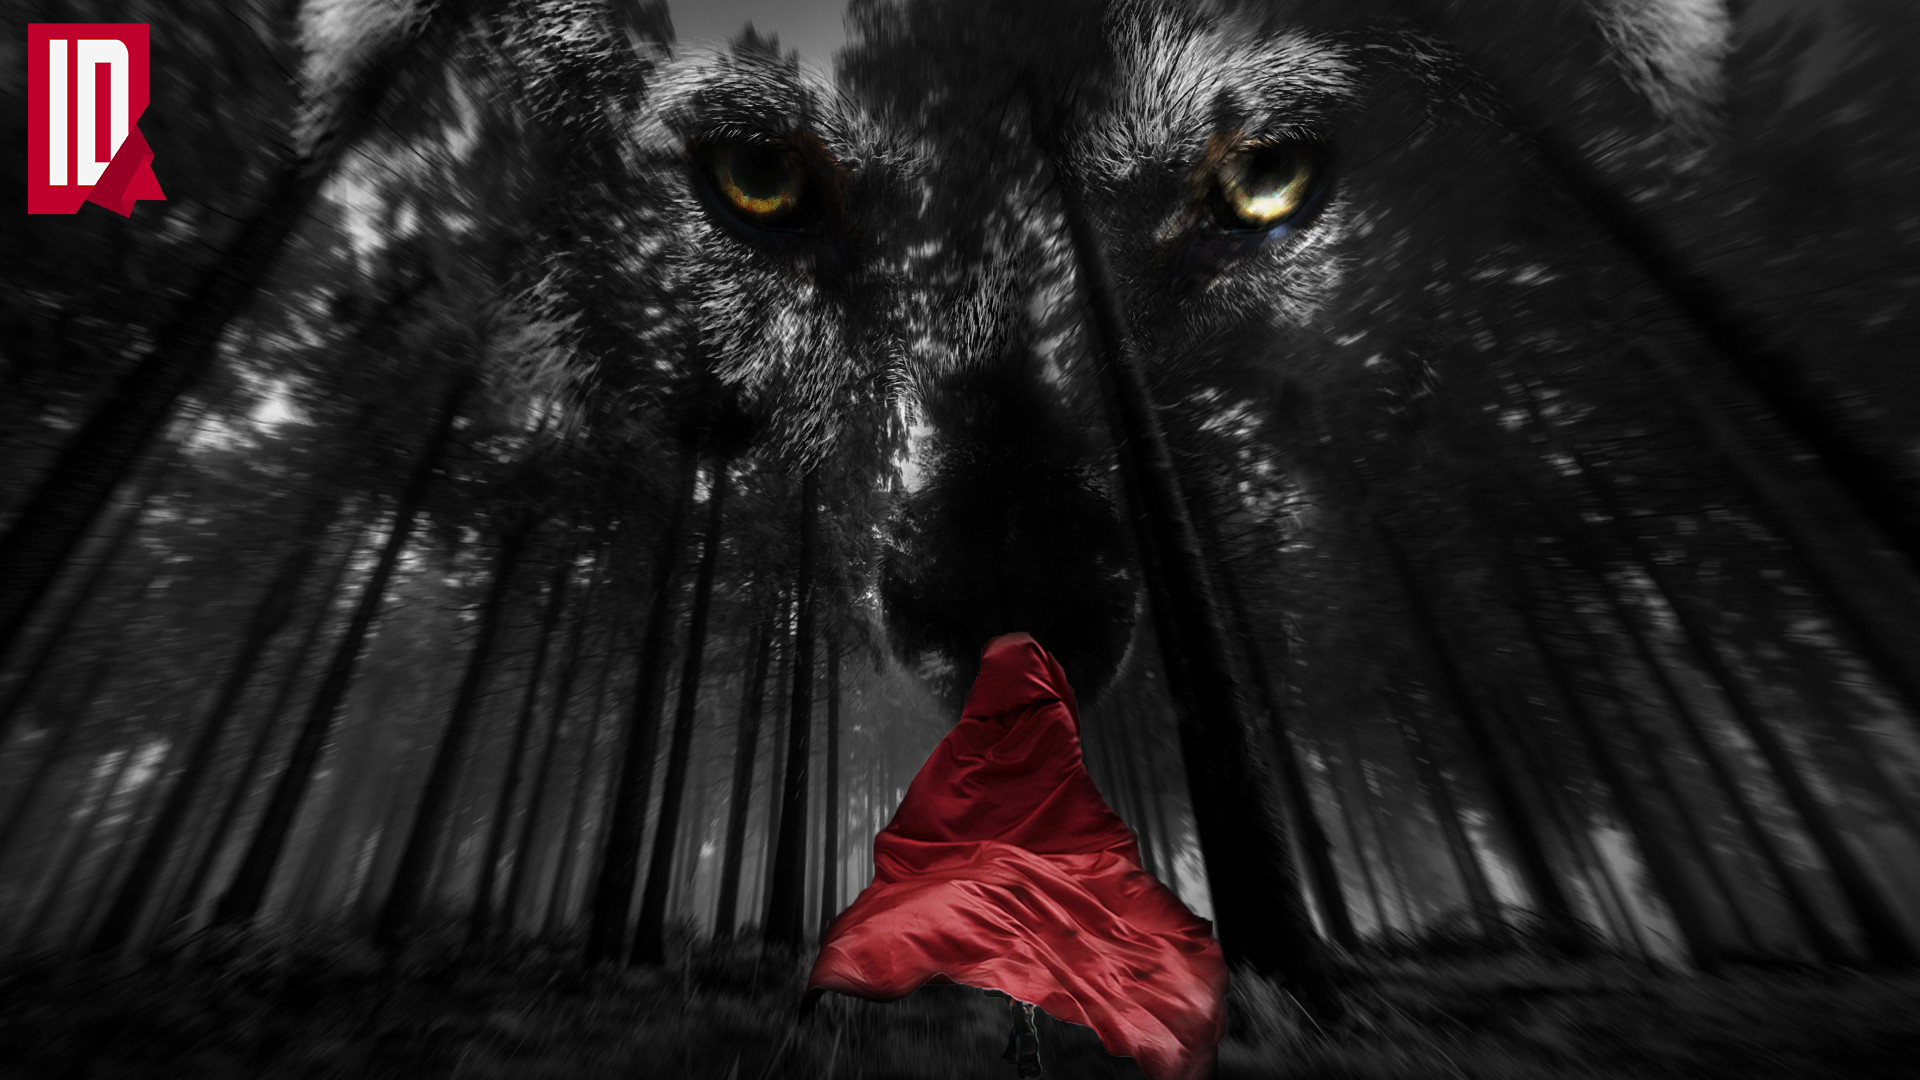 1920x1080 ... HD-Little Red Riding Hood And The Wolf | Special Little Red Riding Hood  And ...